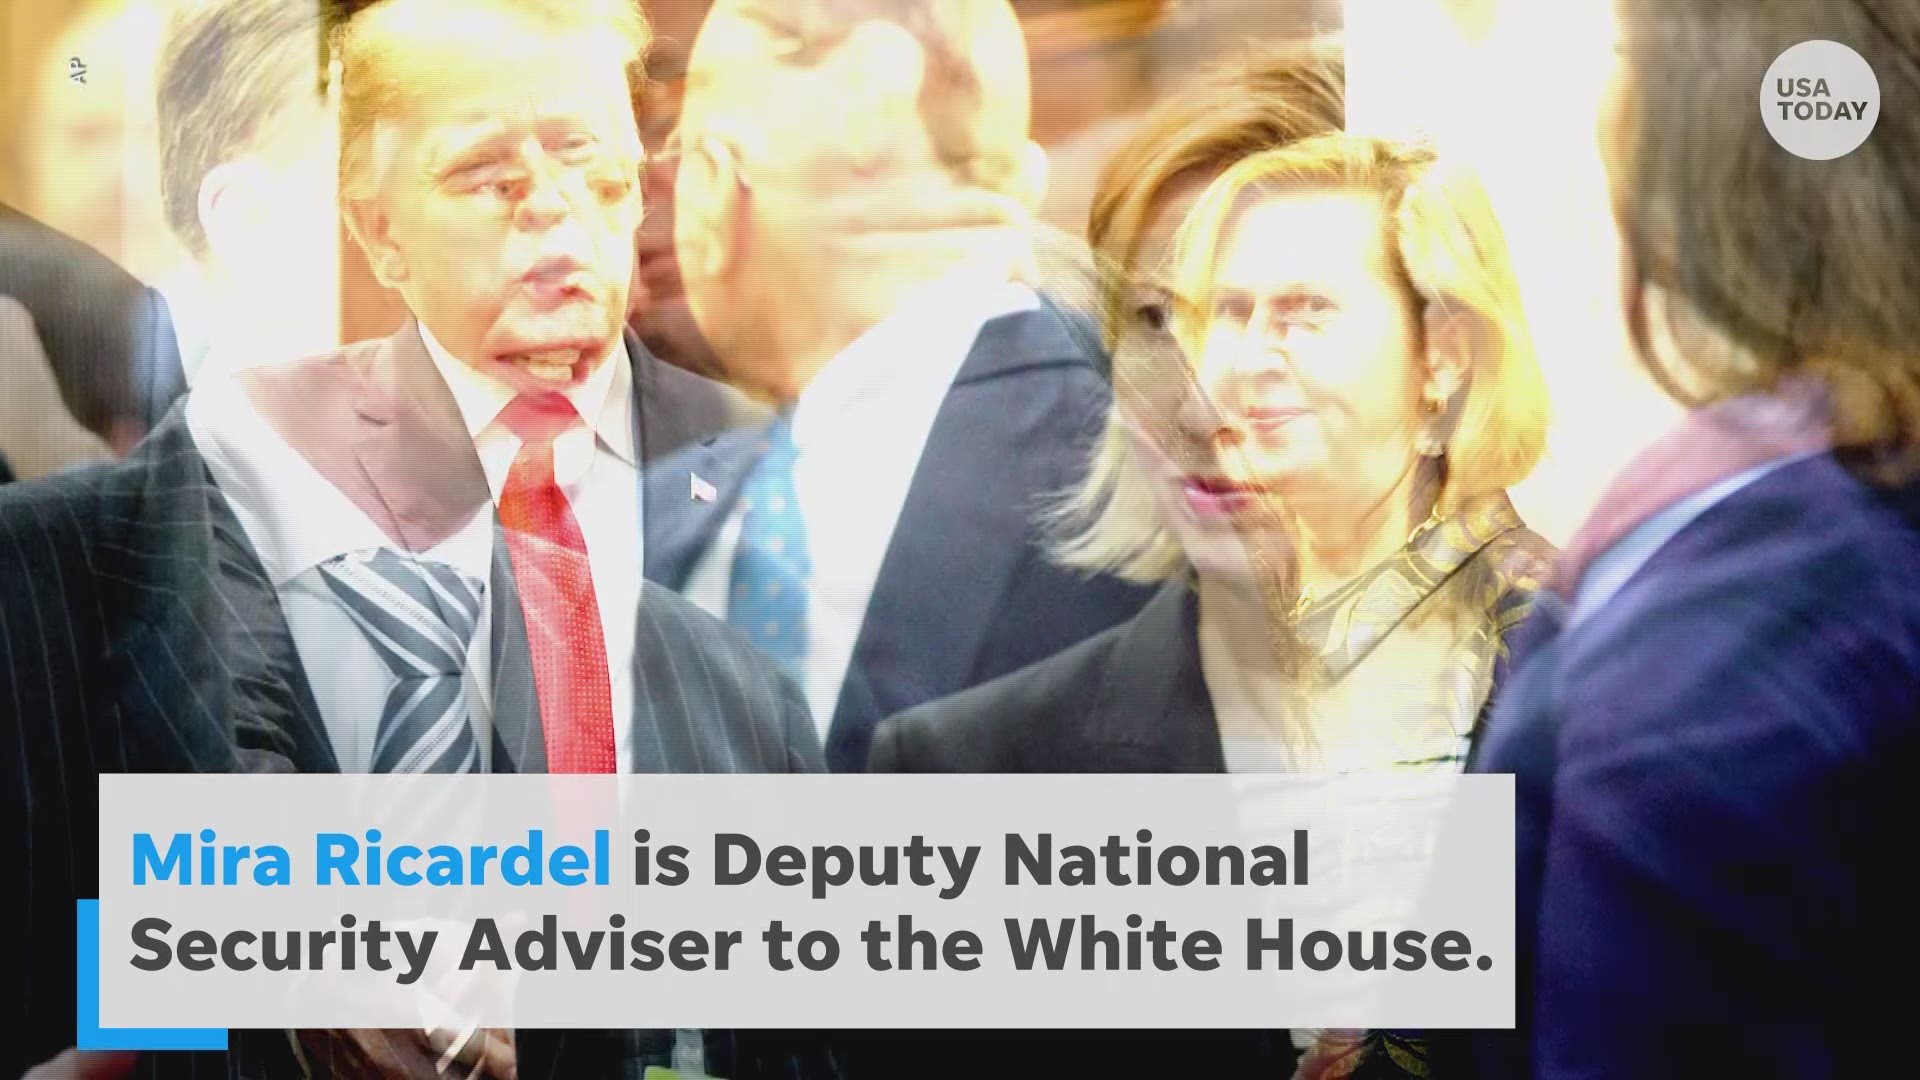 In an extraordinary step for a first lady, Melania Trump called for the dismissal of deputy national security adviser Mira Ricardel. The mysterious feud seems to have an unlikely start. (USA TODAY)